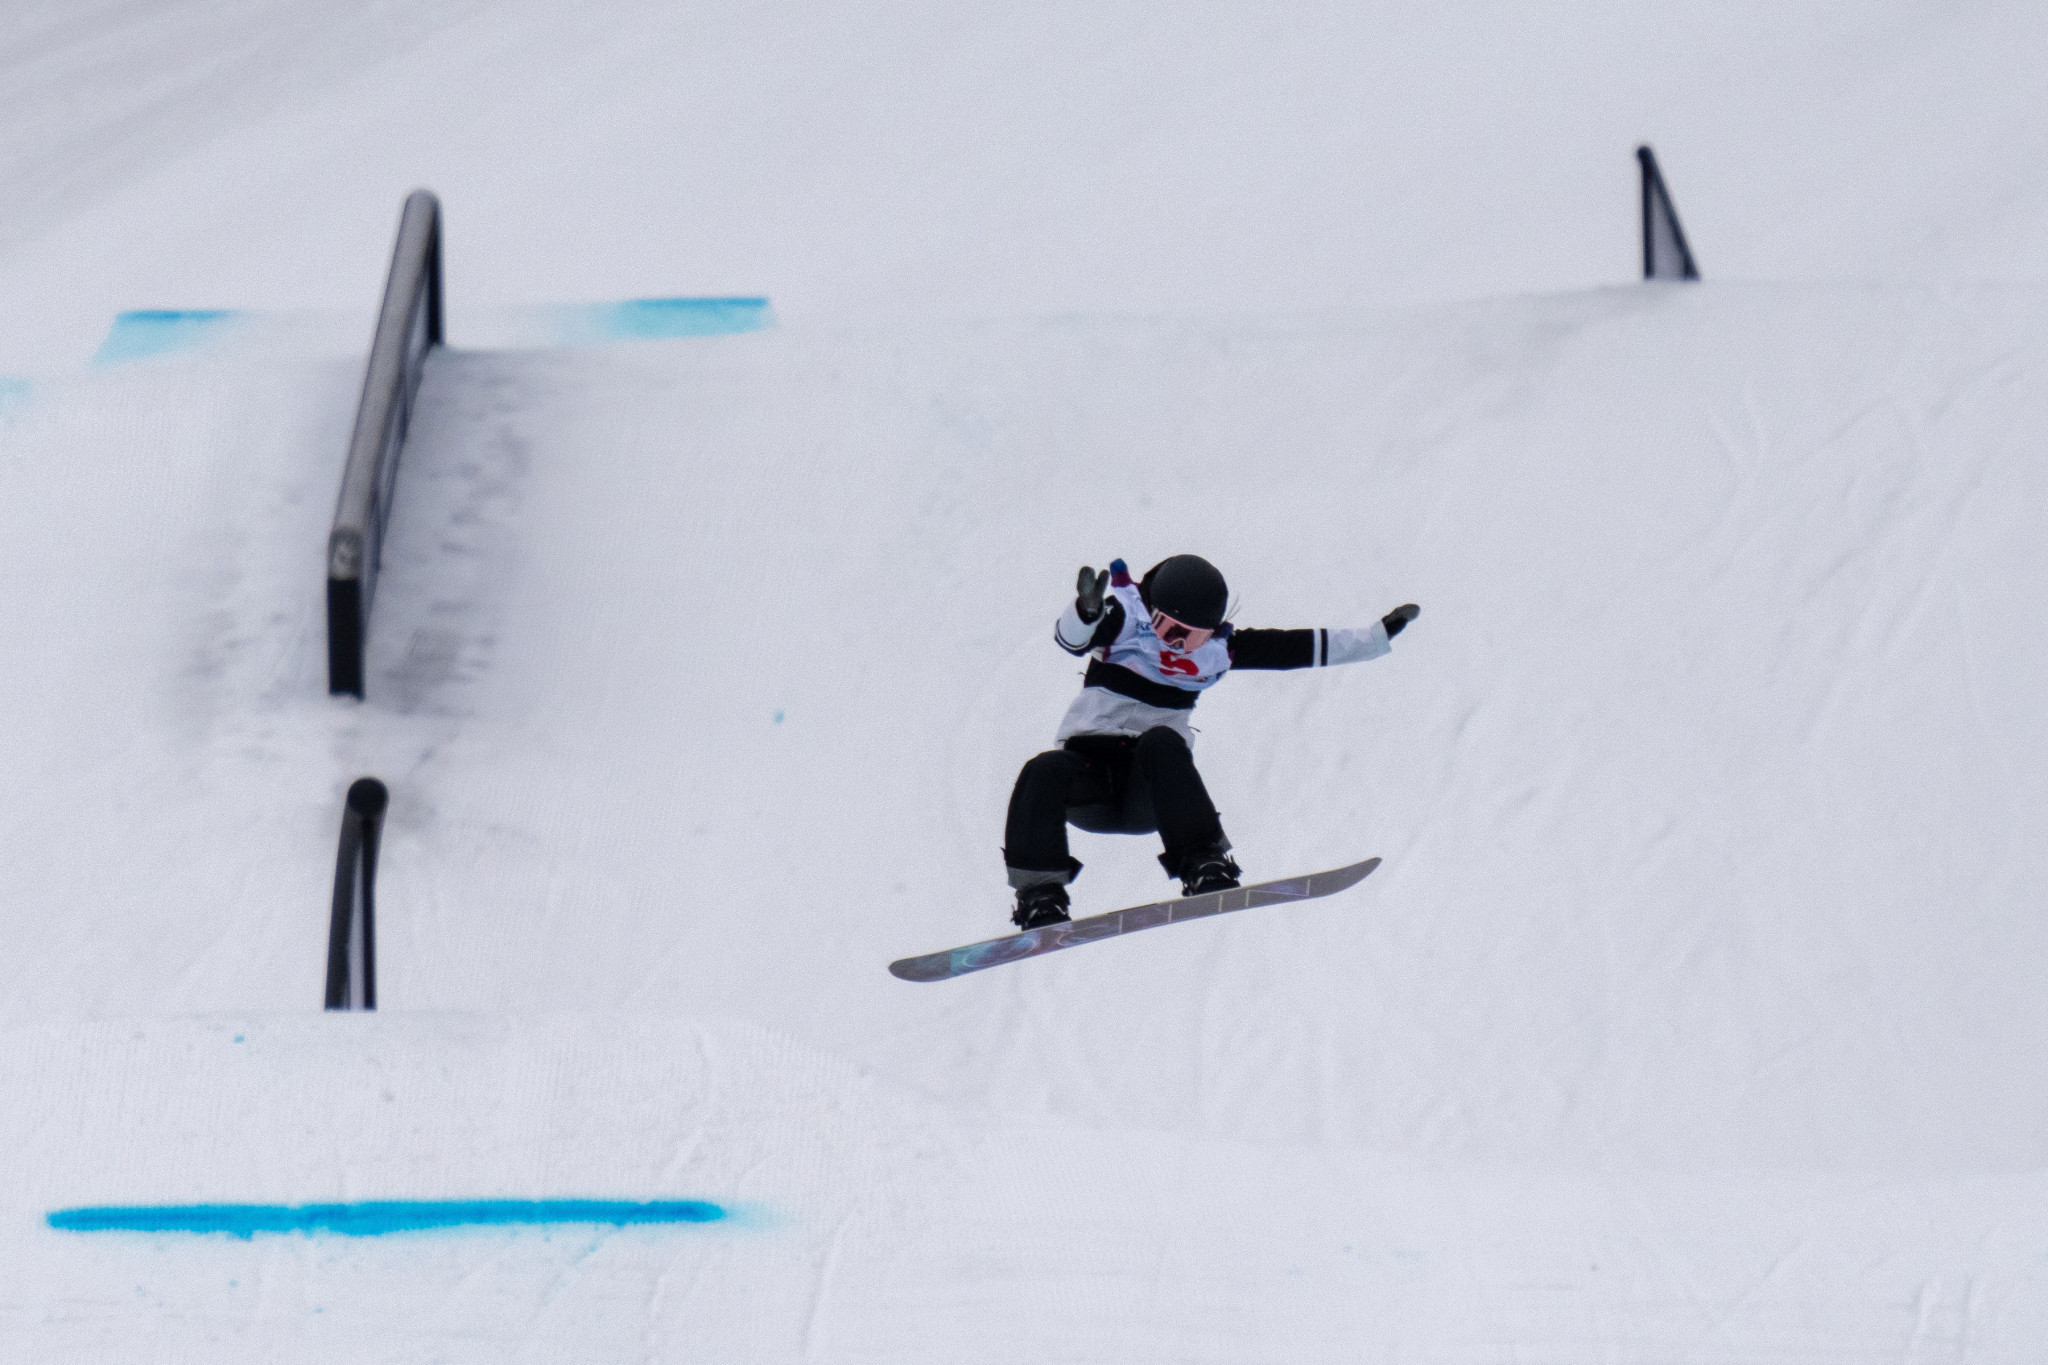 Tinkara Tanja Valcl finished first in the opening run of the women's snowboard slopestyle but then came last on the next run to settle for third ©FISU